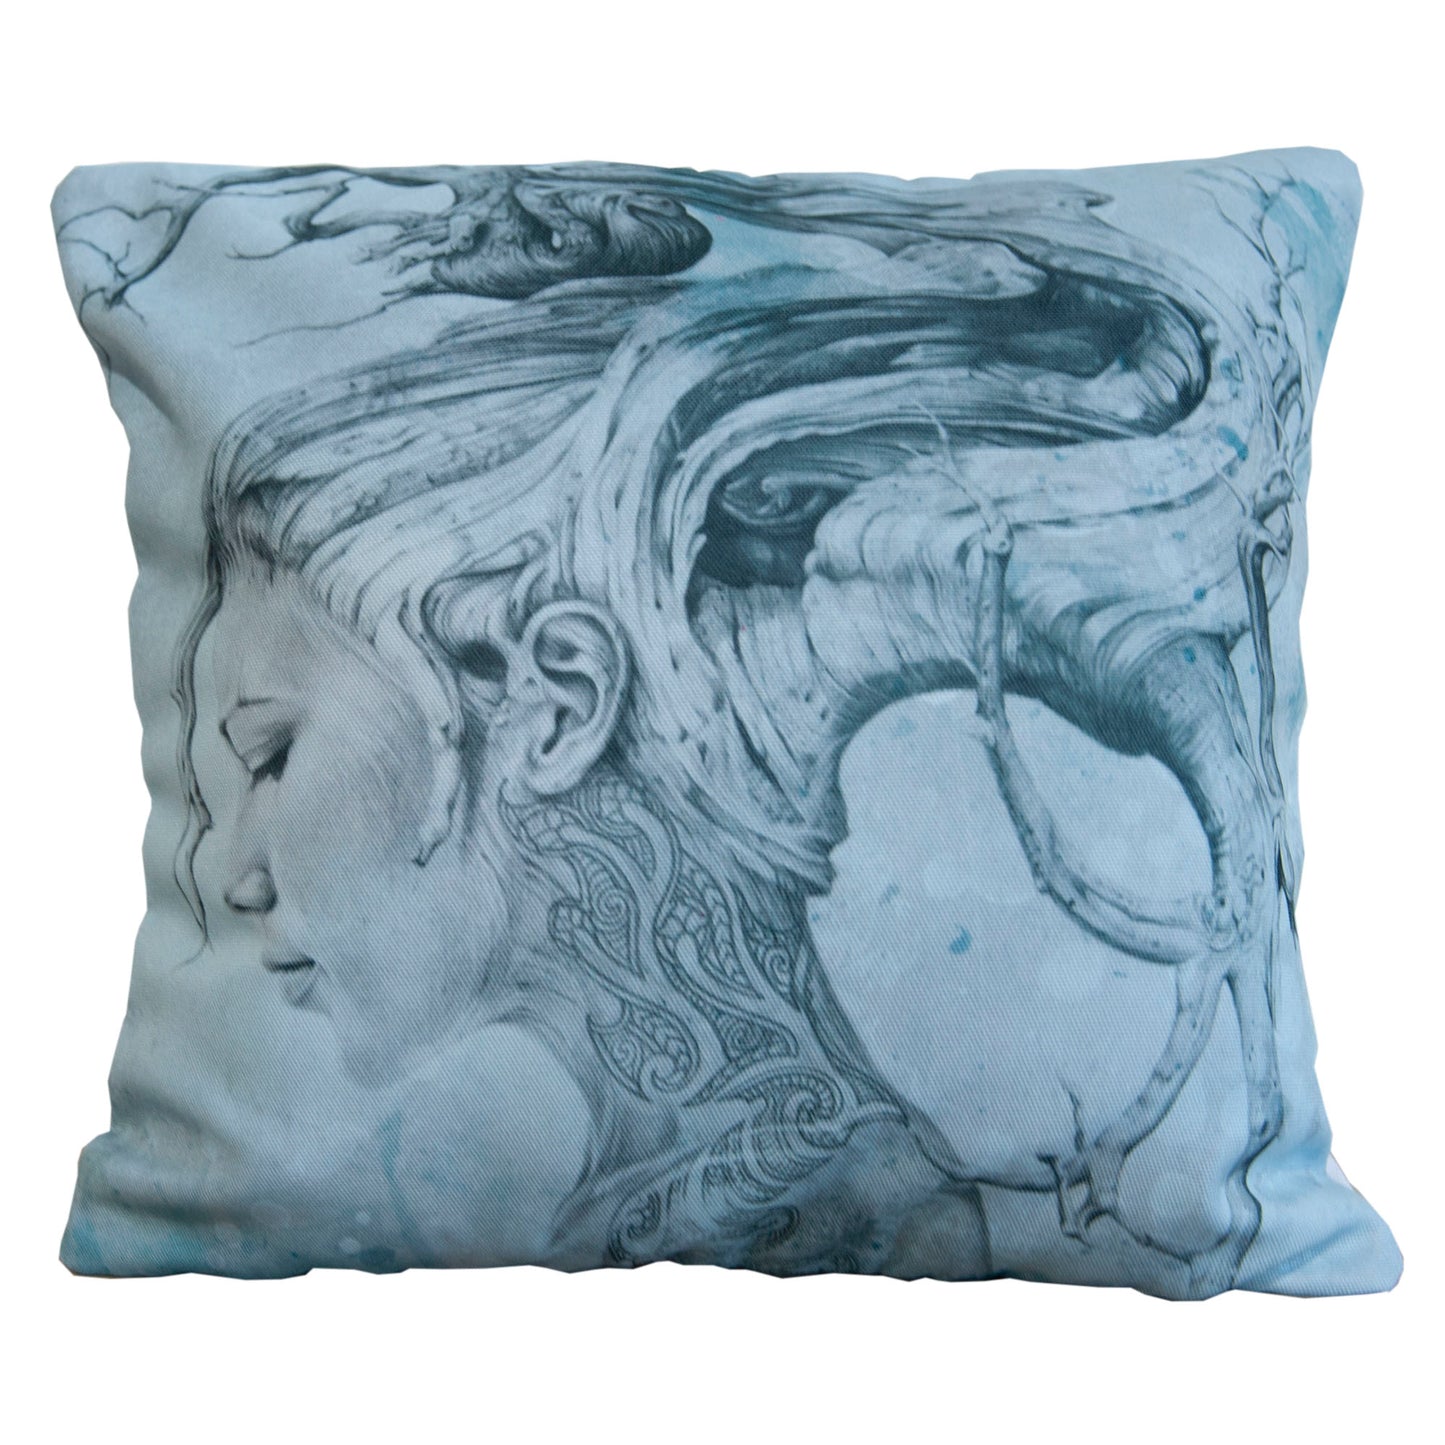 Cushion cover featuring 'Contemplation Blue' artwork